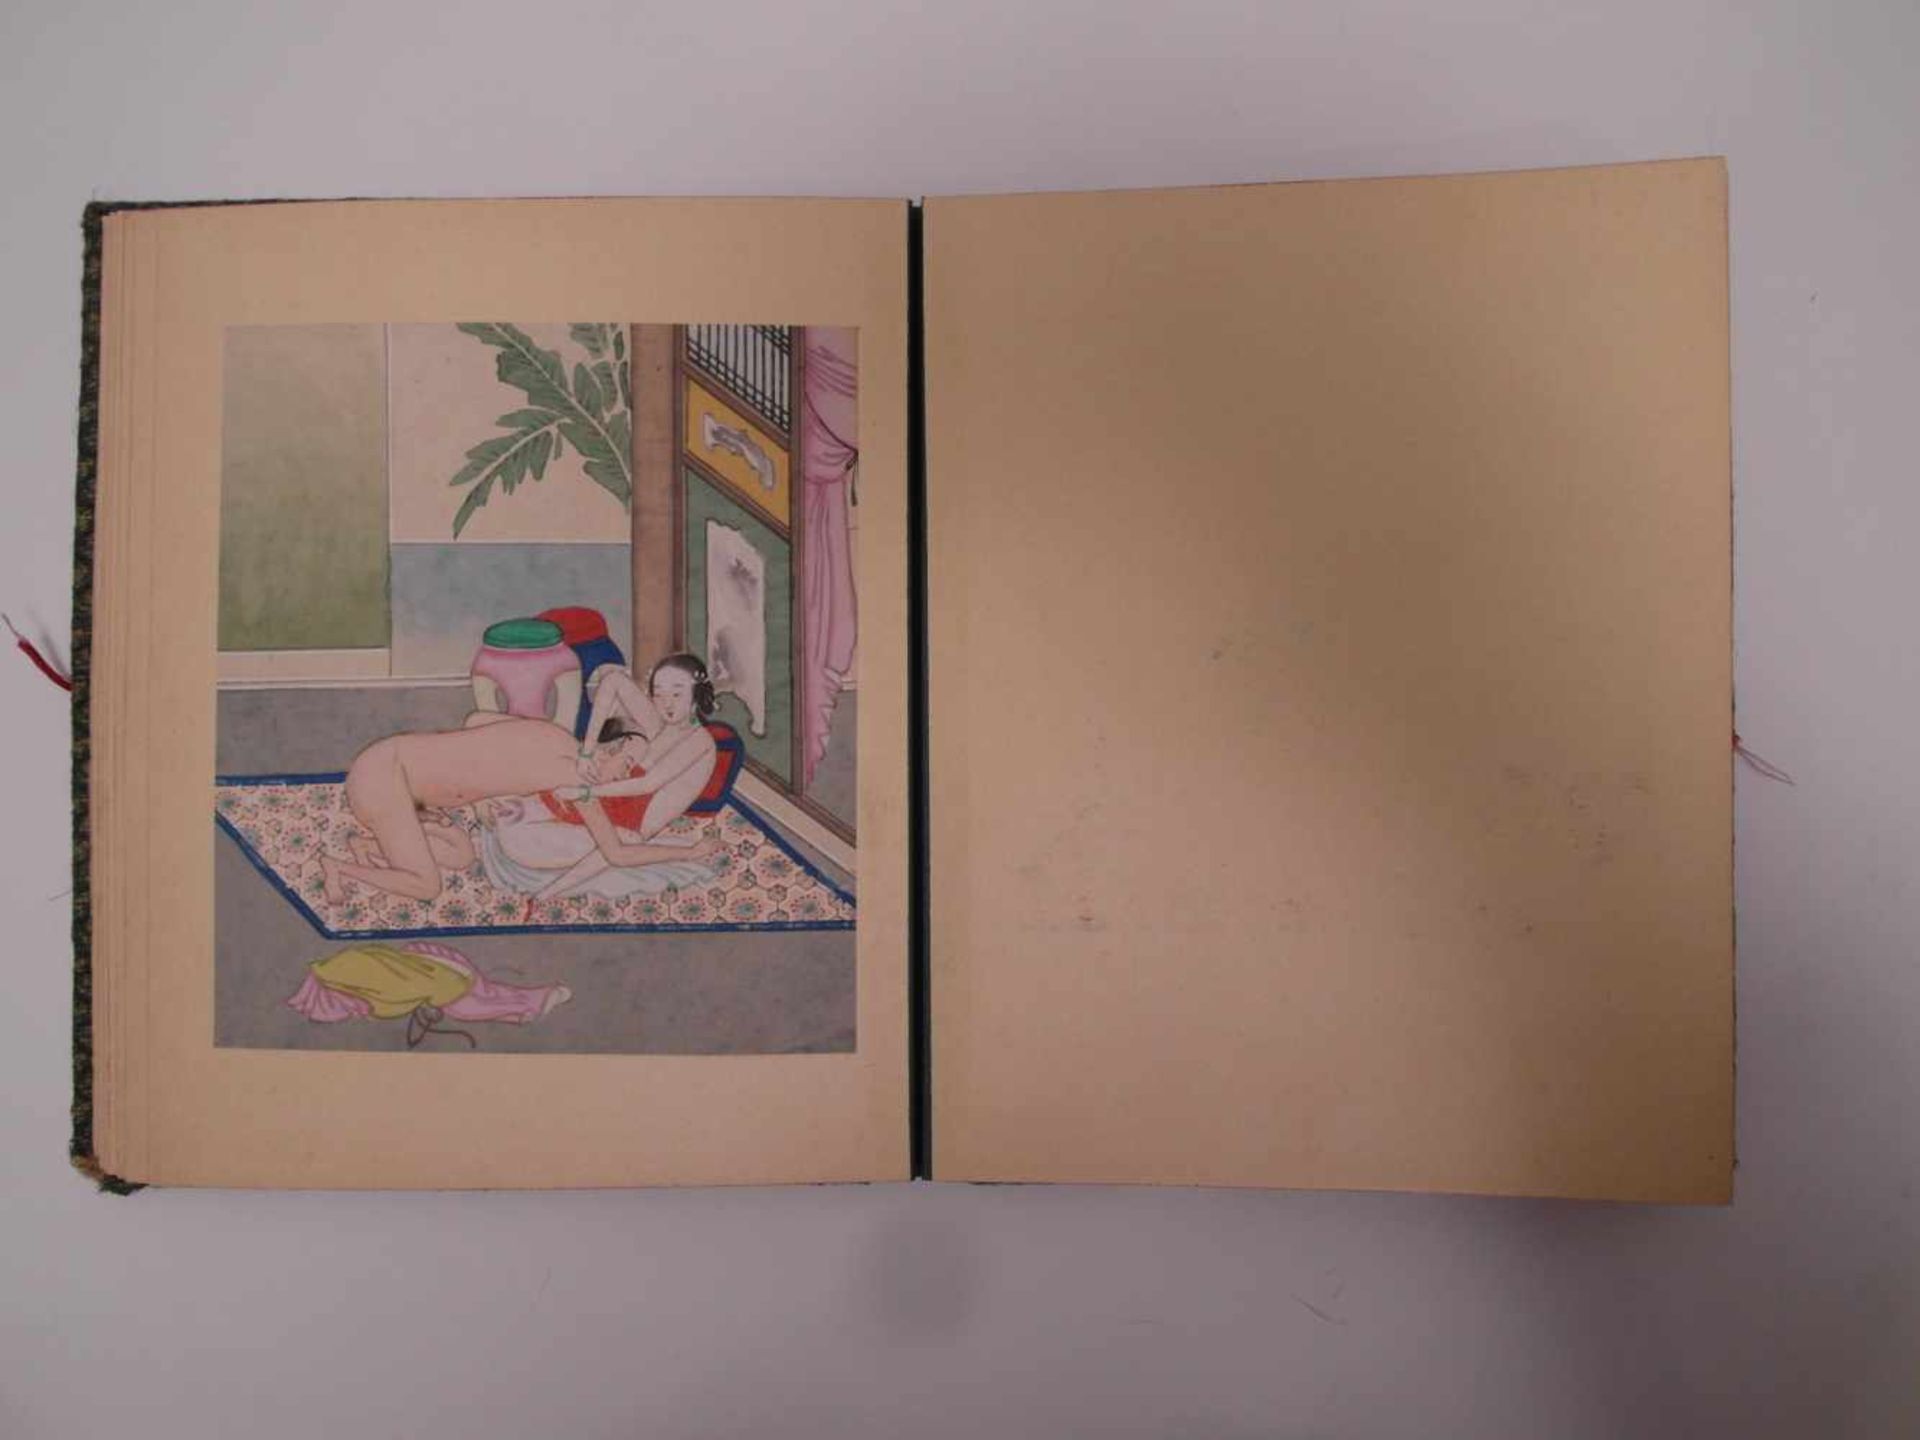 ALBUM WITH TWELVE EROTIC PAINTINGS. China. Qing dynasty. 18th/19th c. Ink and pigments on paper. The - Bild 8 aus 14